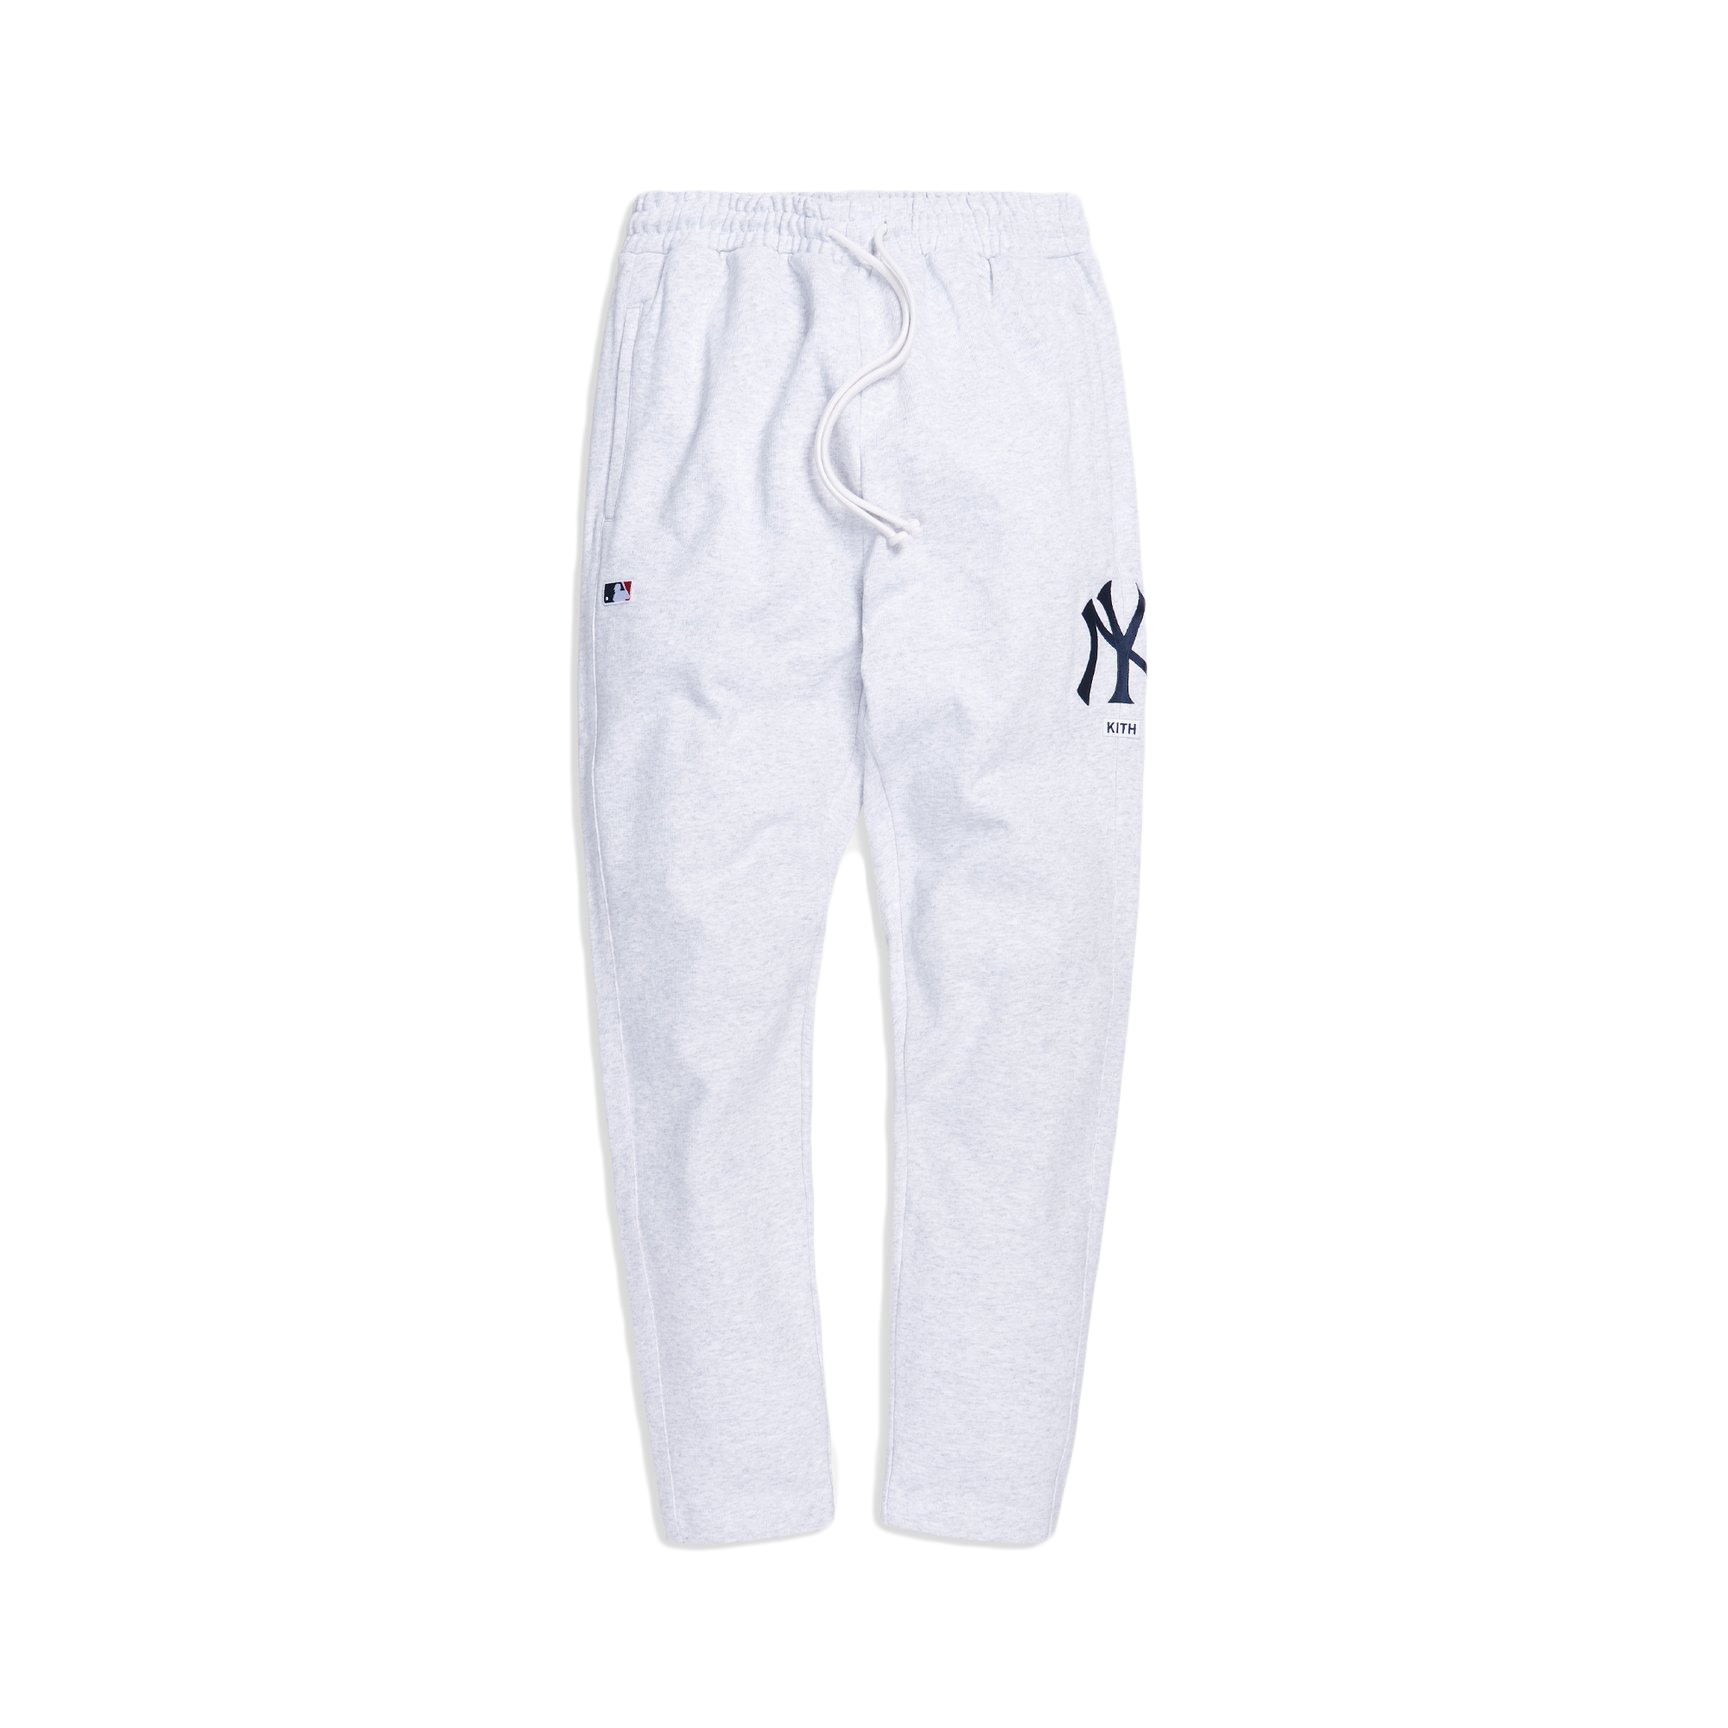 Kith for The New York Yankees Sweatpant-